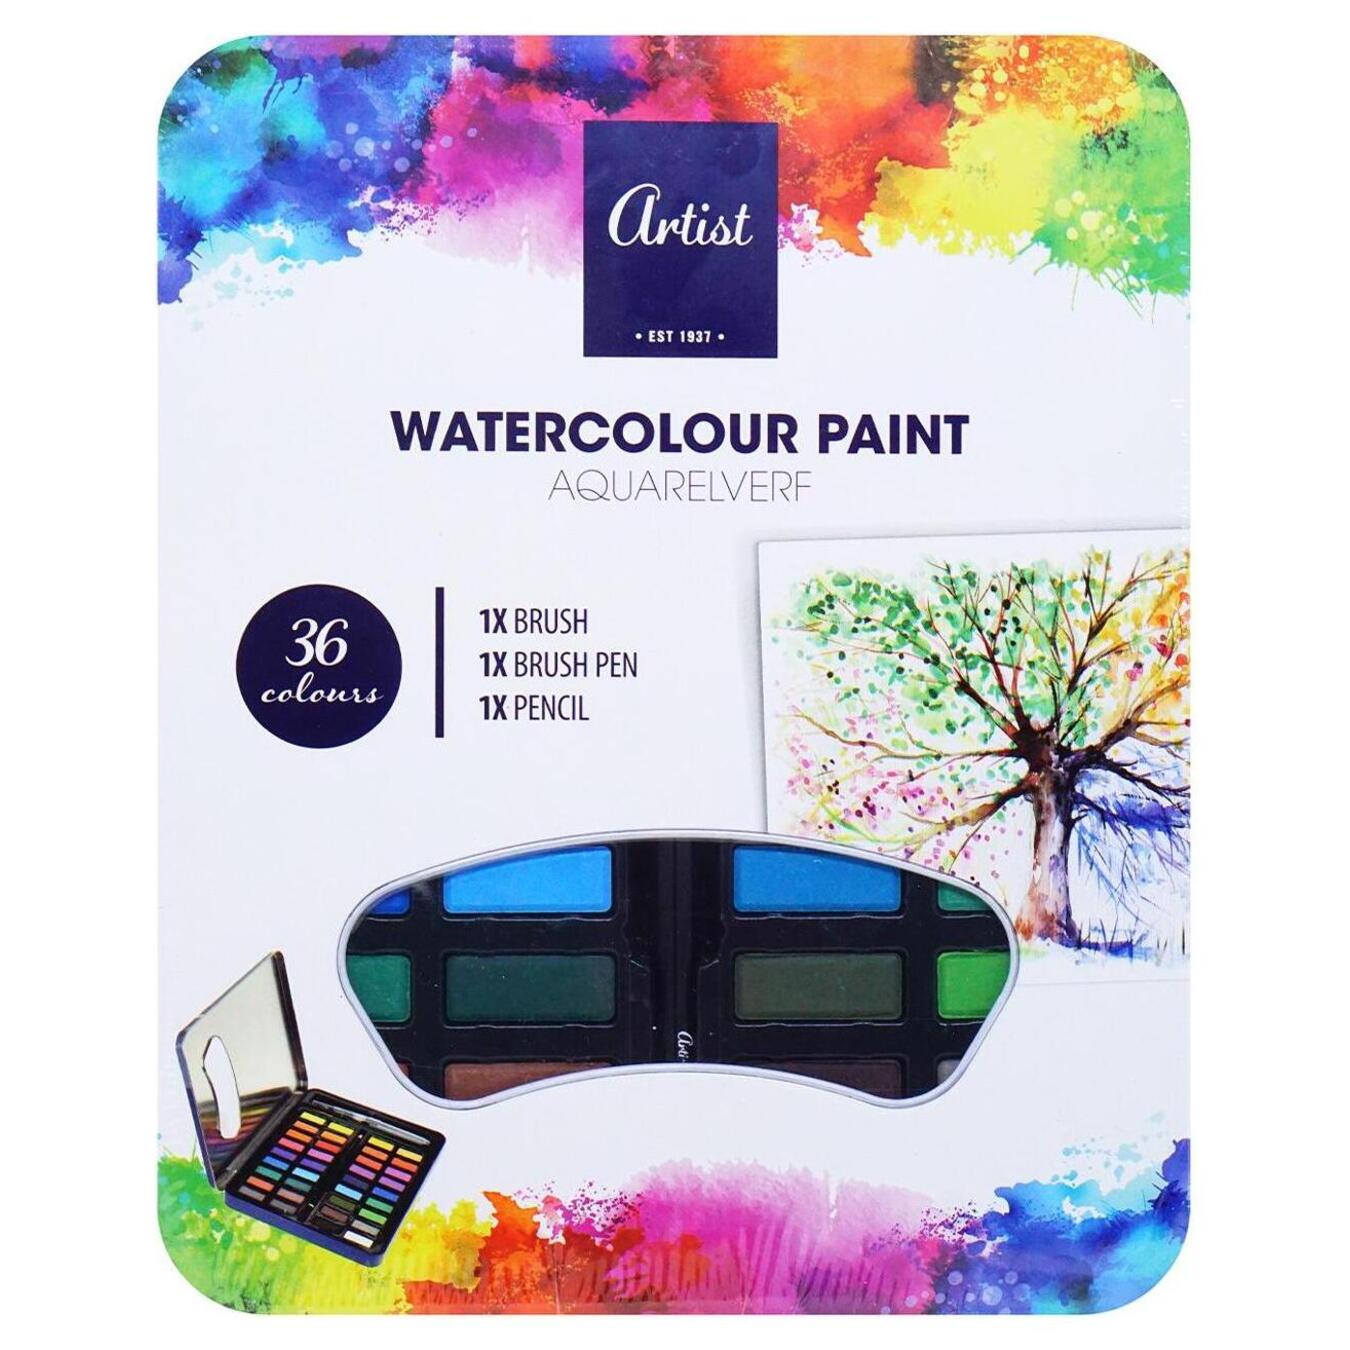 Watercolor paints 36 colors with 2 brushes and a pencil